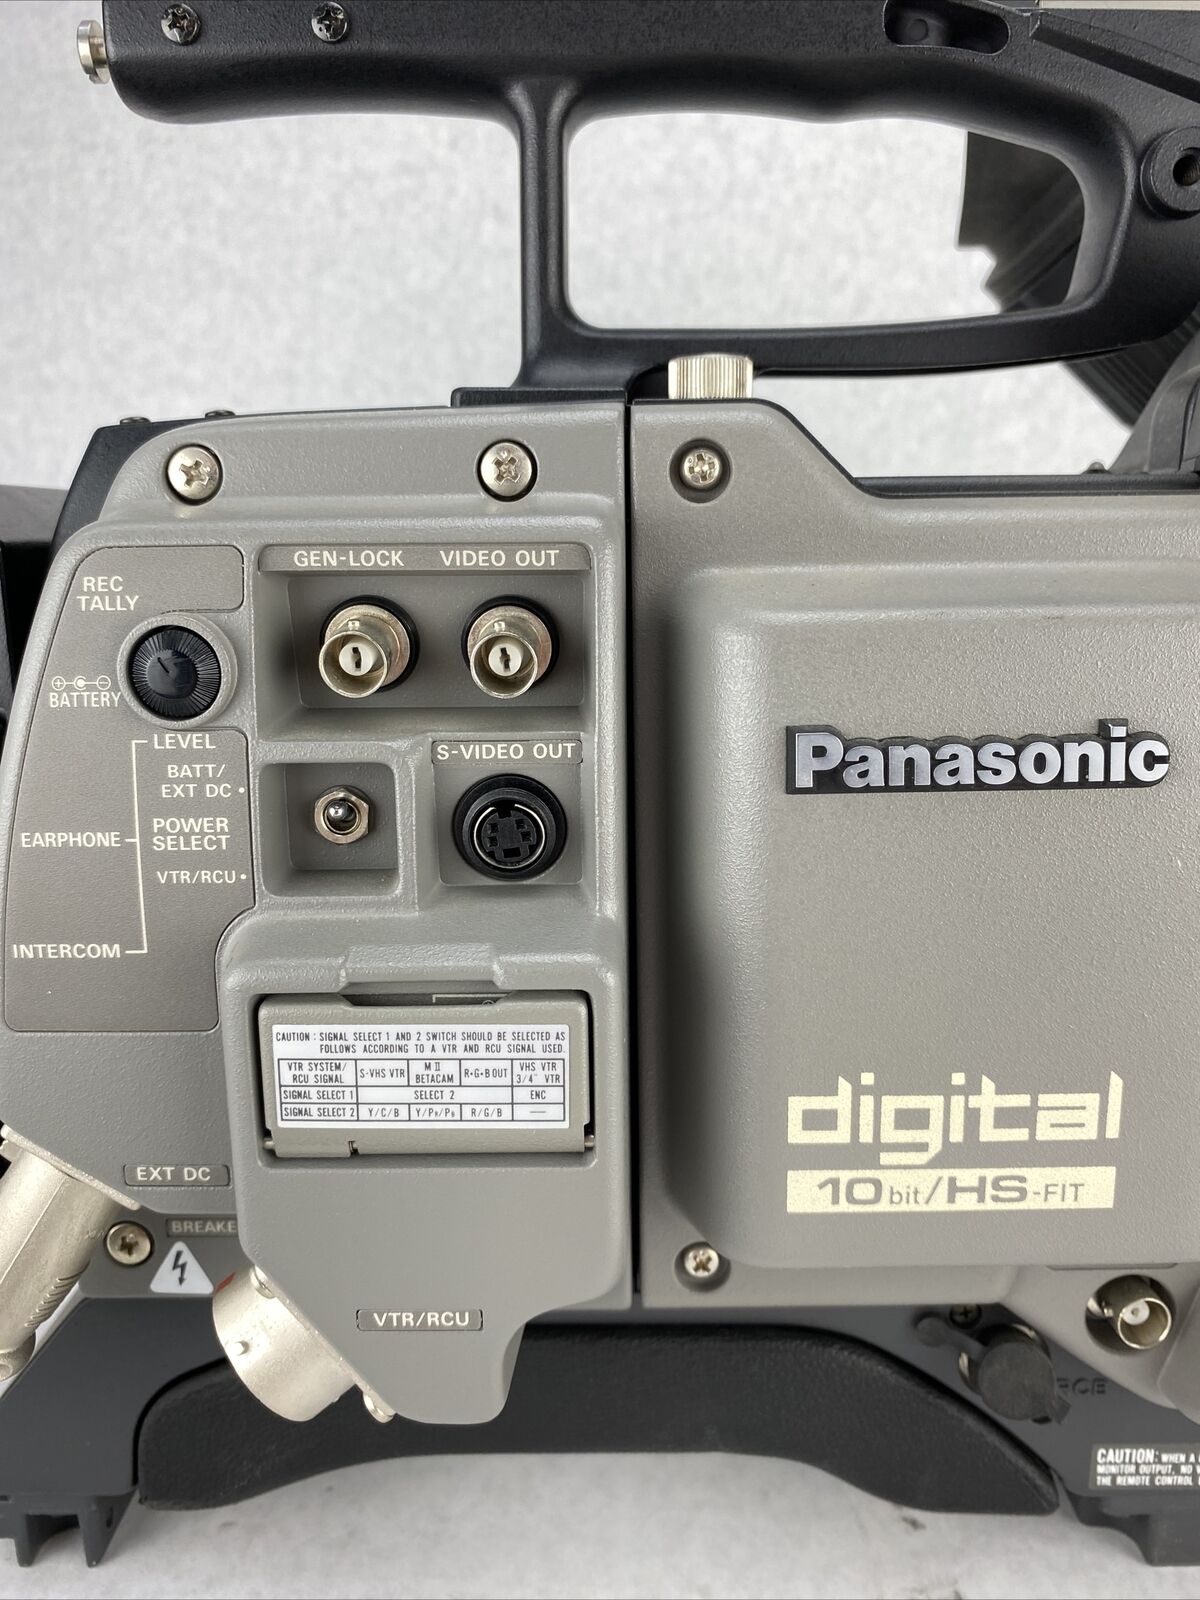 Panasonic WV-F565 Color Video Camera 10Bit/HS-Fit with WV-PS34 Power Unit